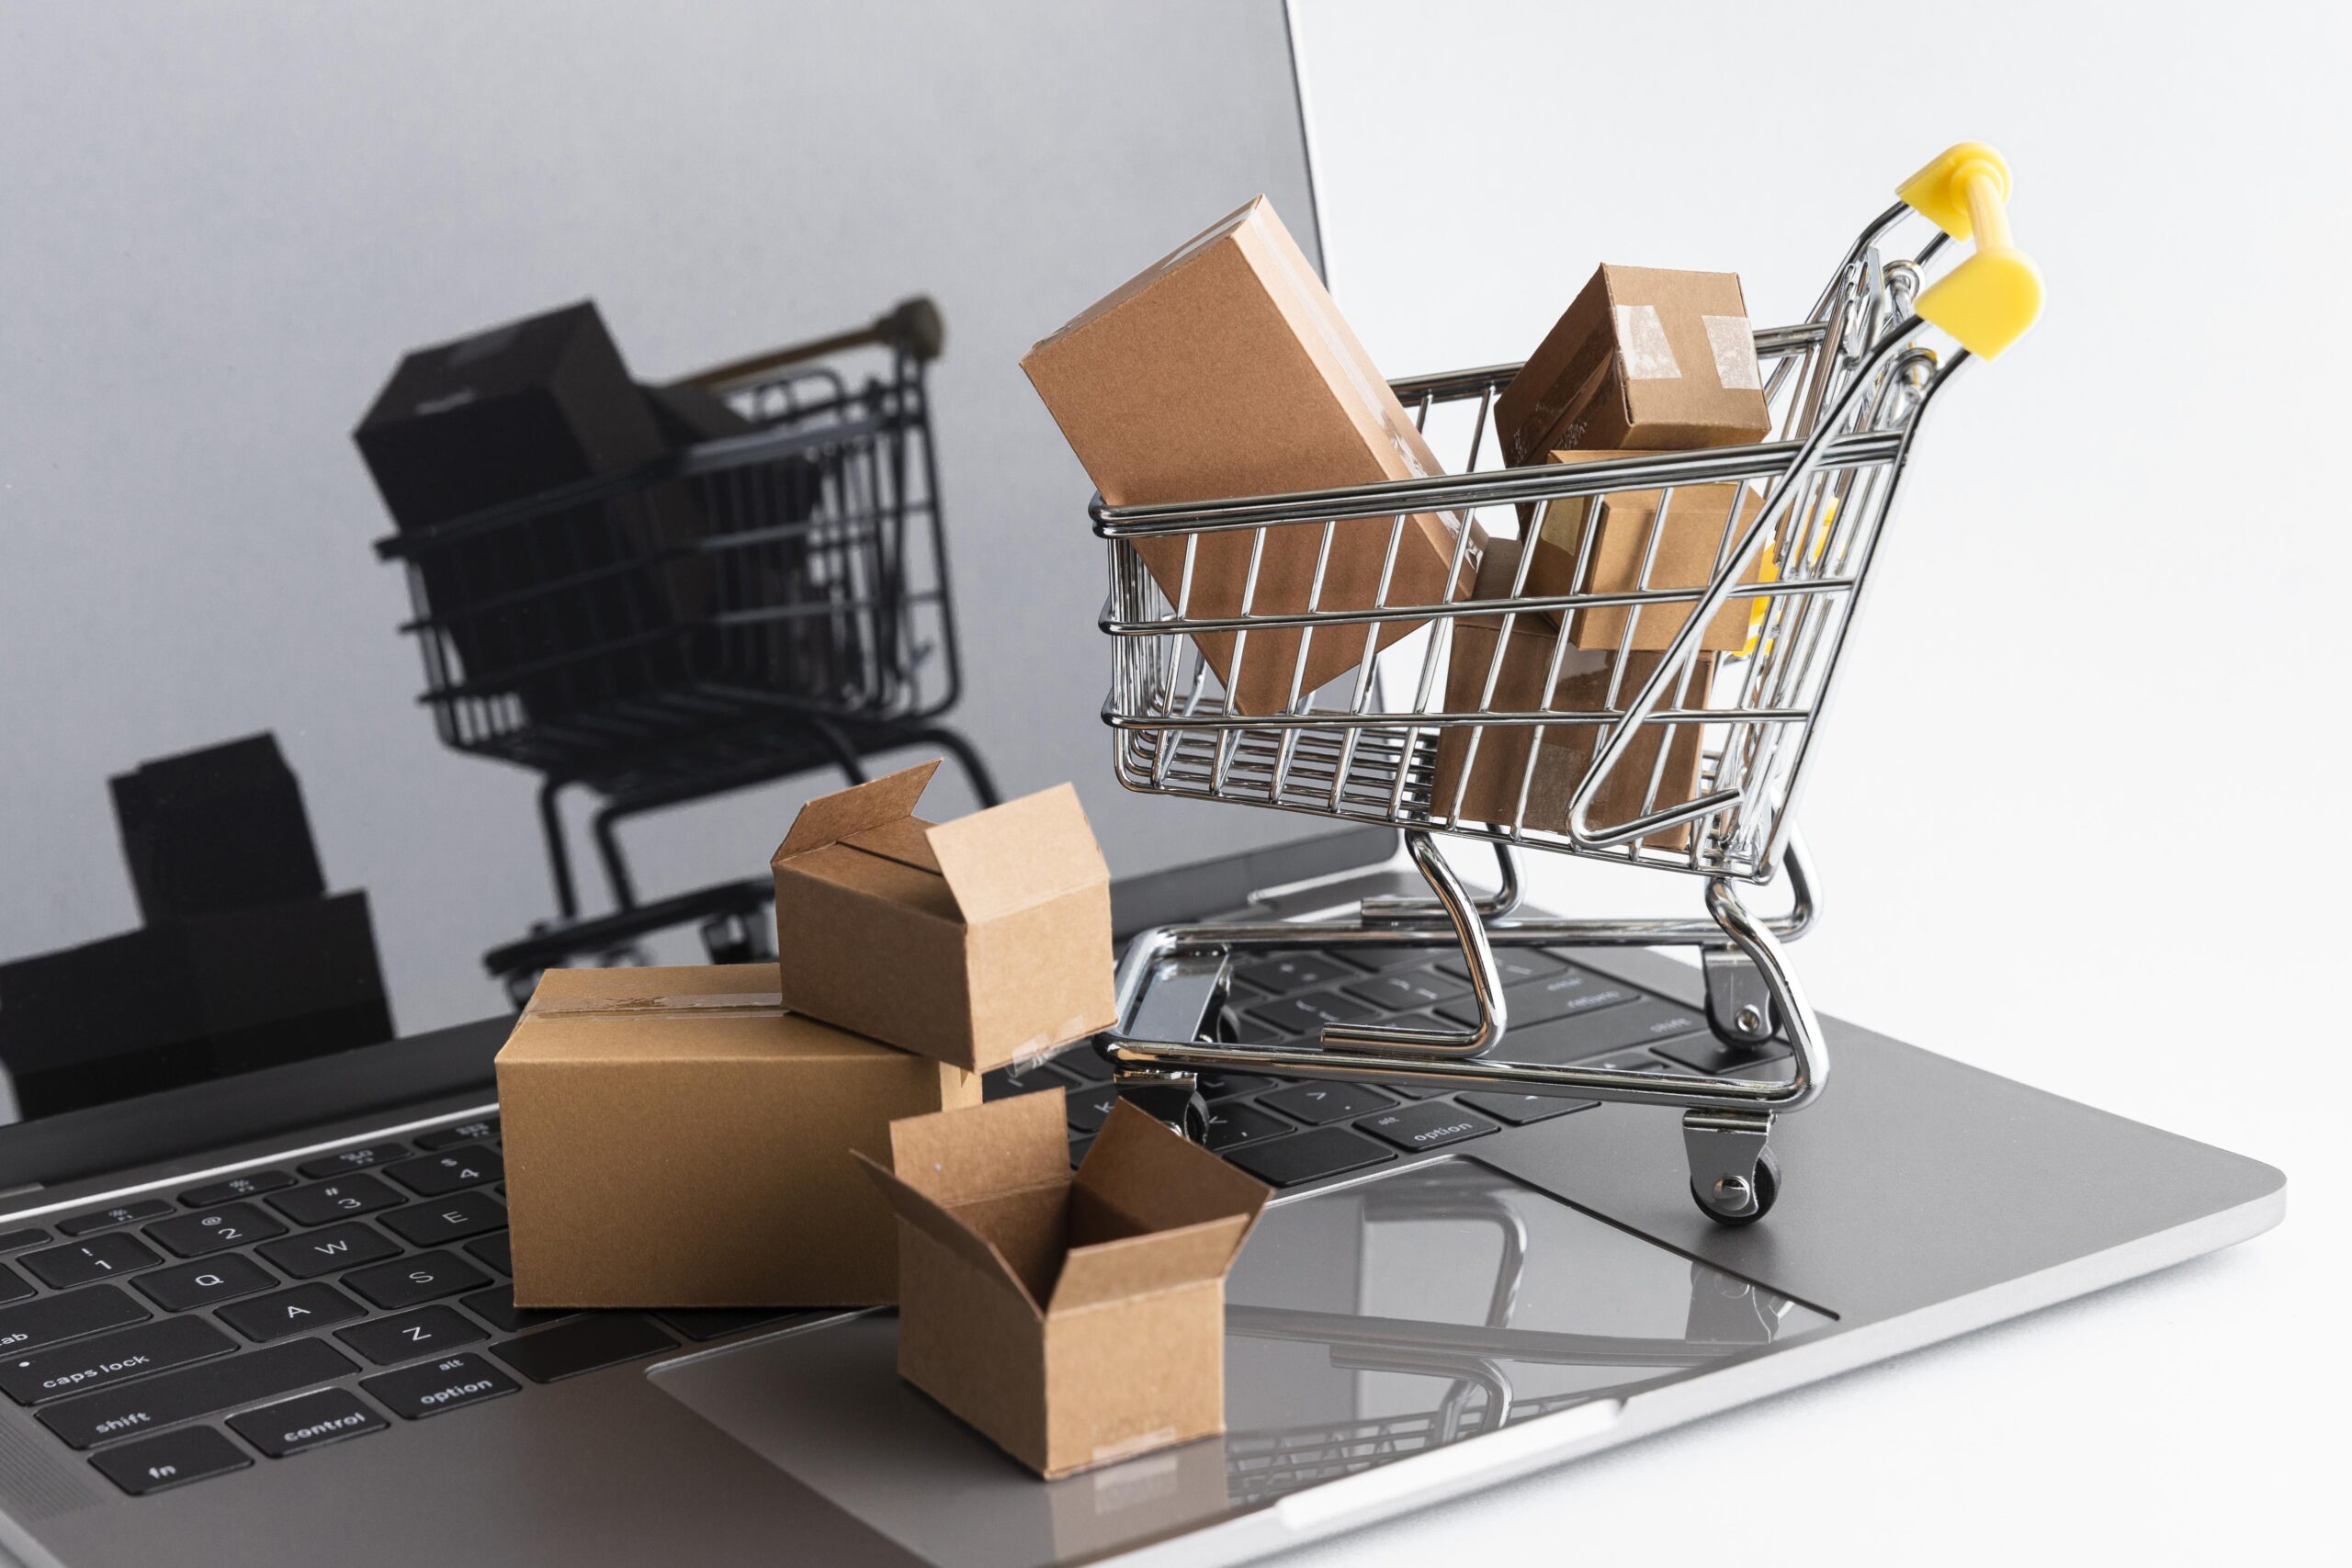 Practical Tips and Resources for SMEs to Get Started with E-commerce